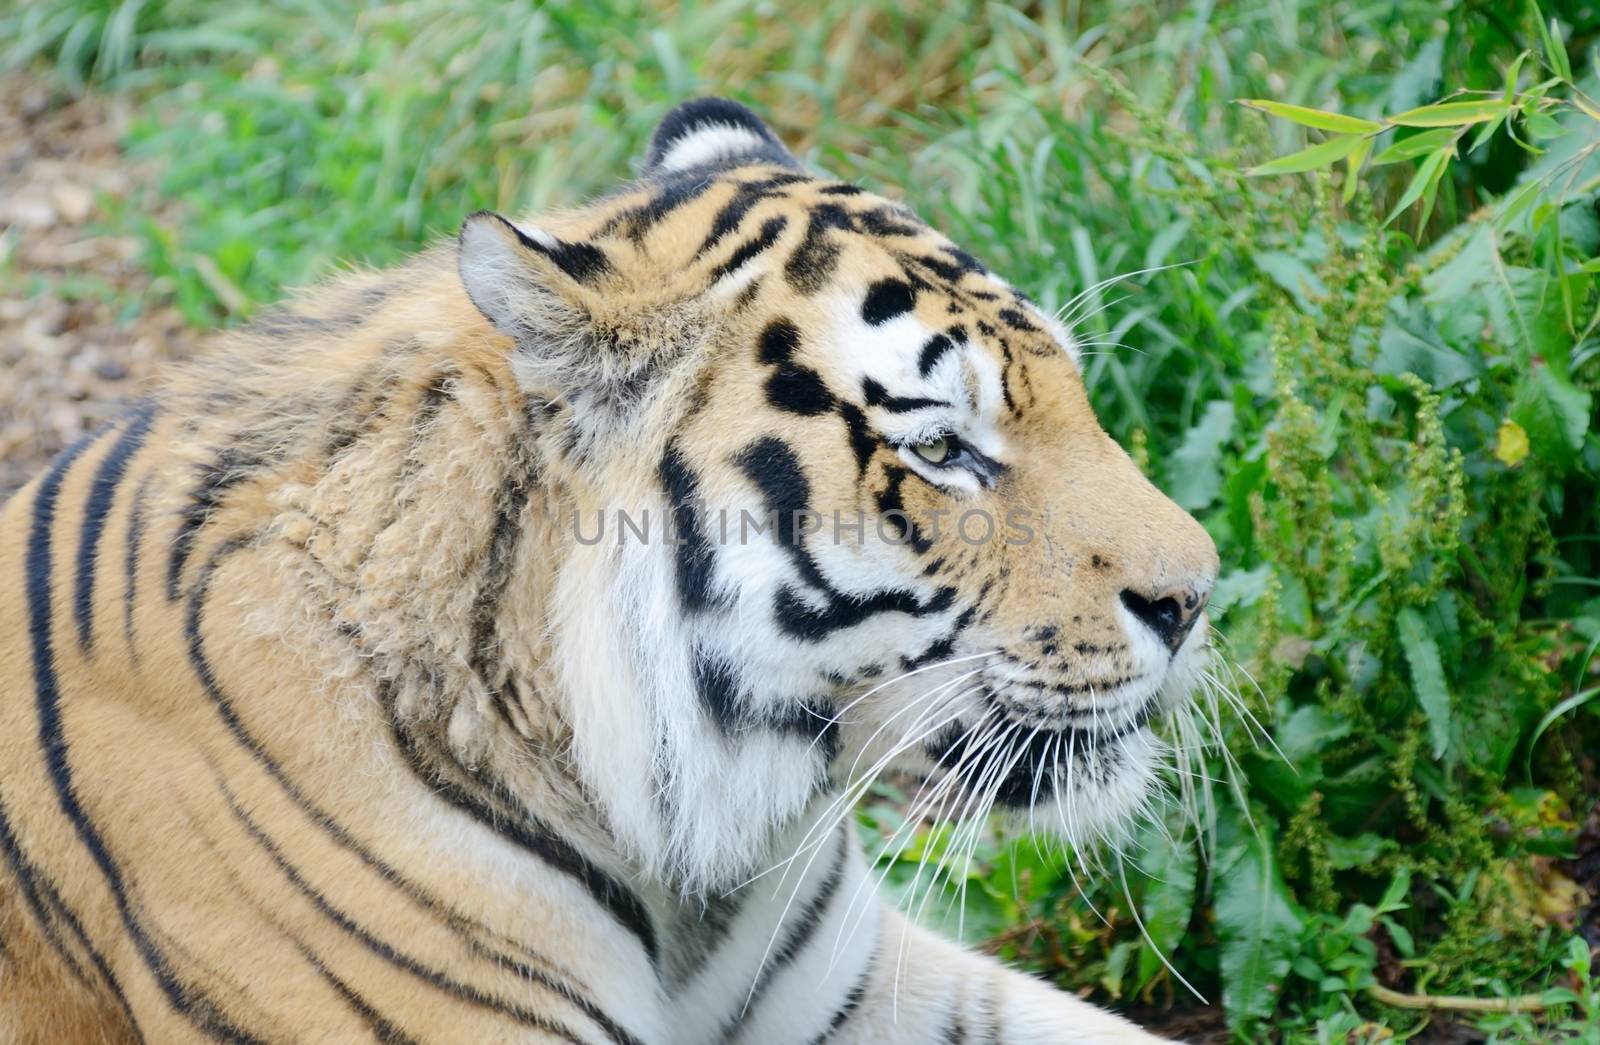 Closeup-up of tiger profile showing head and fur detail